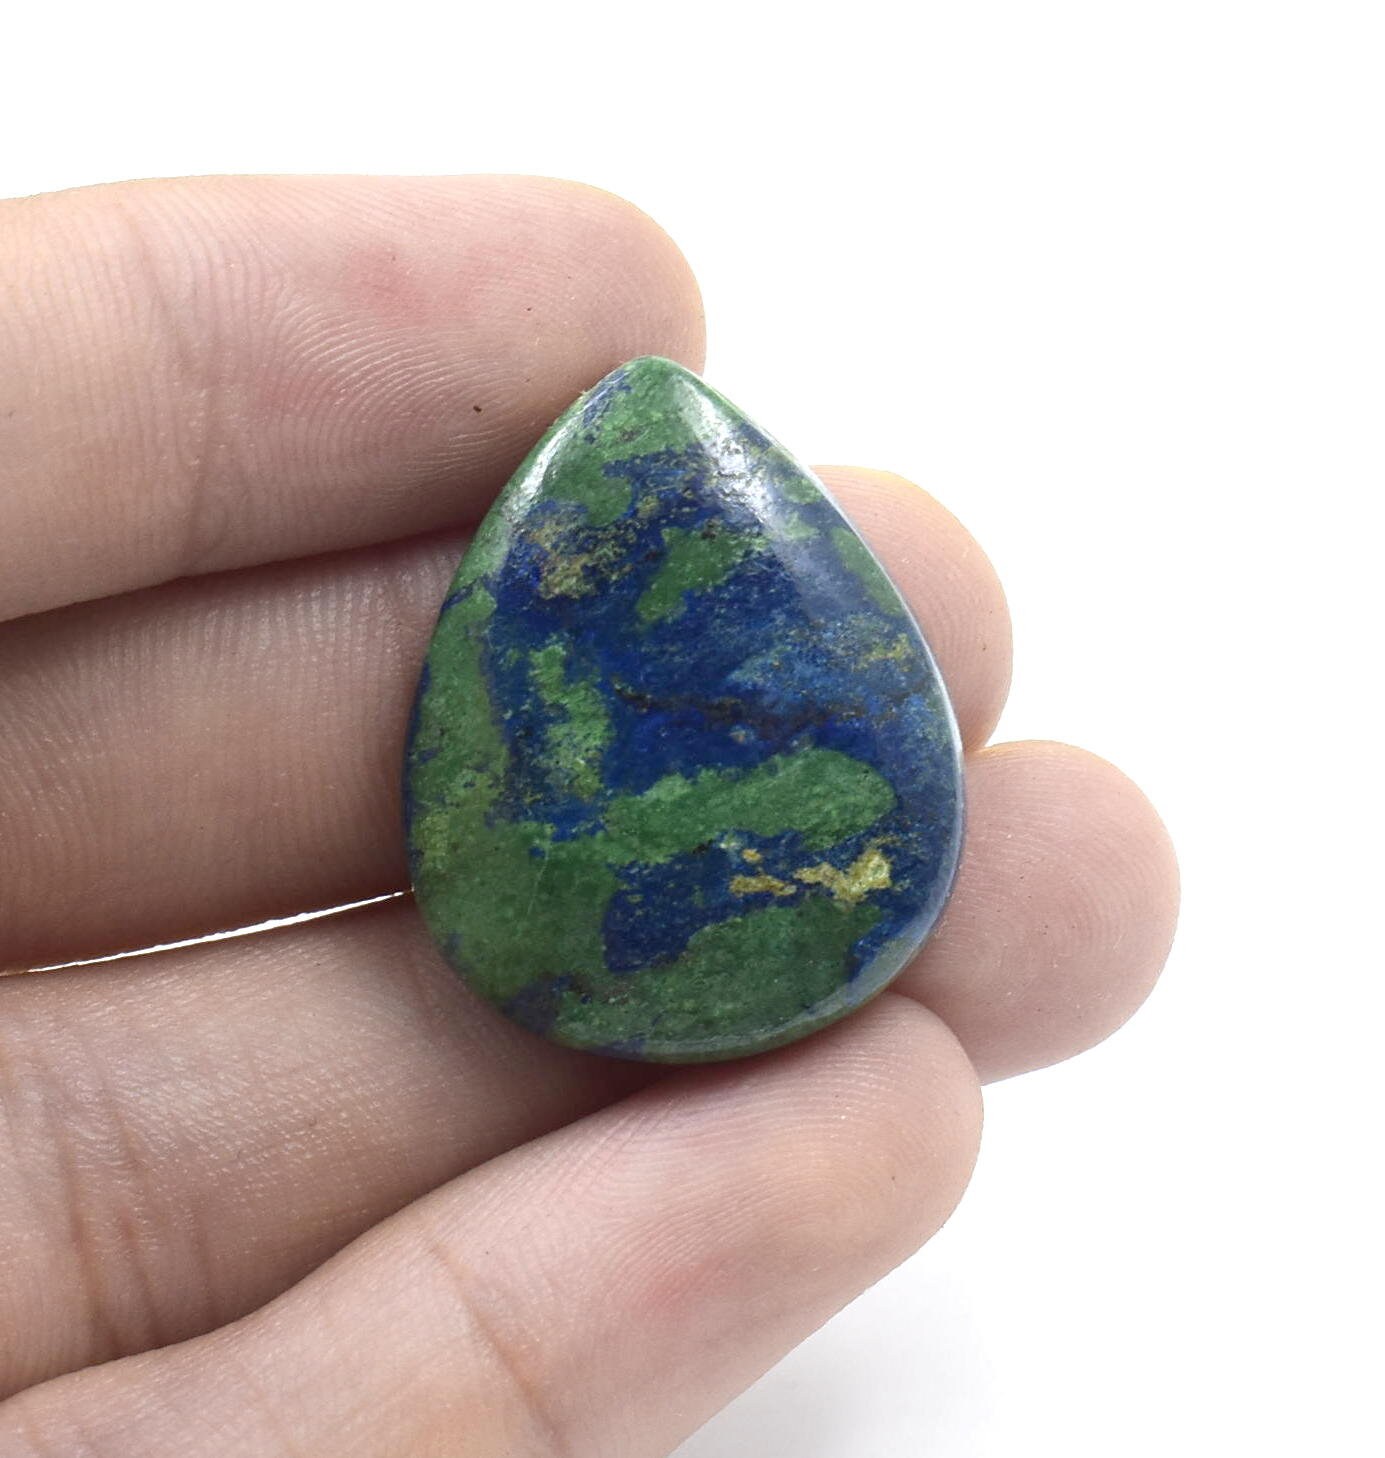 100% Natural Azurite Malachite Cabochon Good quality stone Beautiful Art Making for jewellery Ring 45.95 CARAT 28X22 MM | Save 33% - Rajasthan Living 11